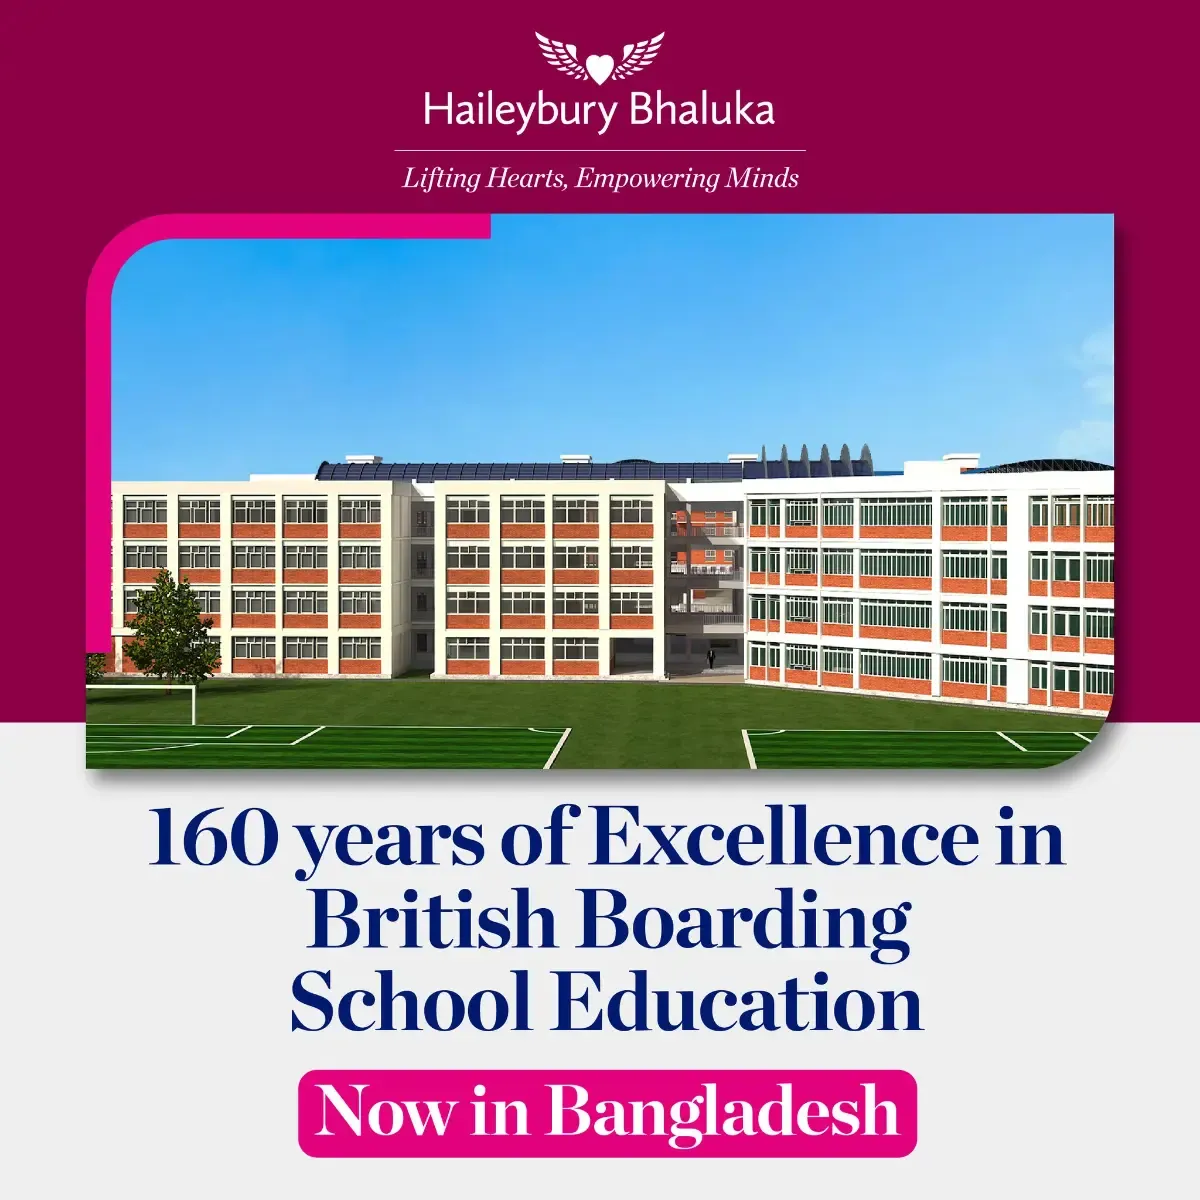 Haileybury Bhaluka is a premier British boarding school in Bangladesh that is here to build Asia’s finest students at Asia’s finest campus.